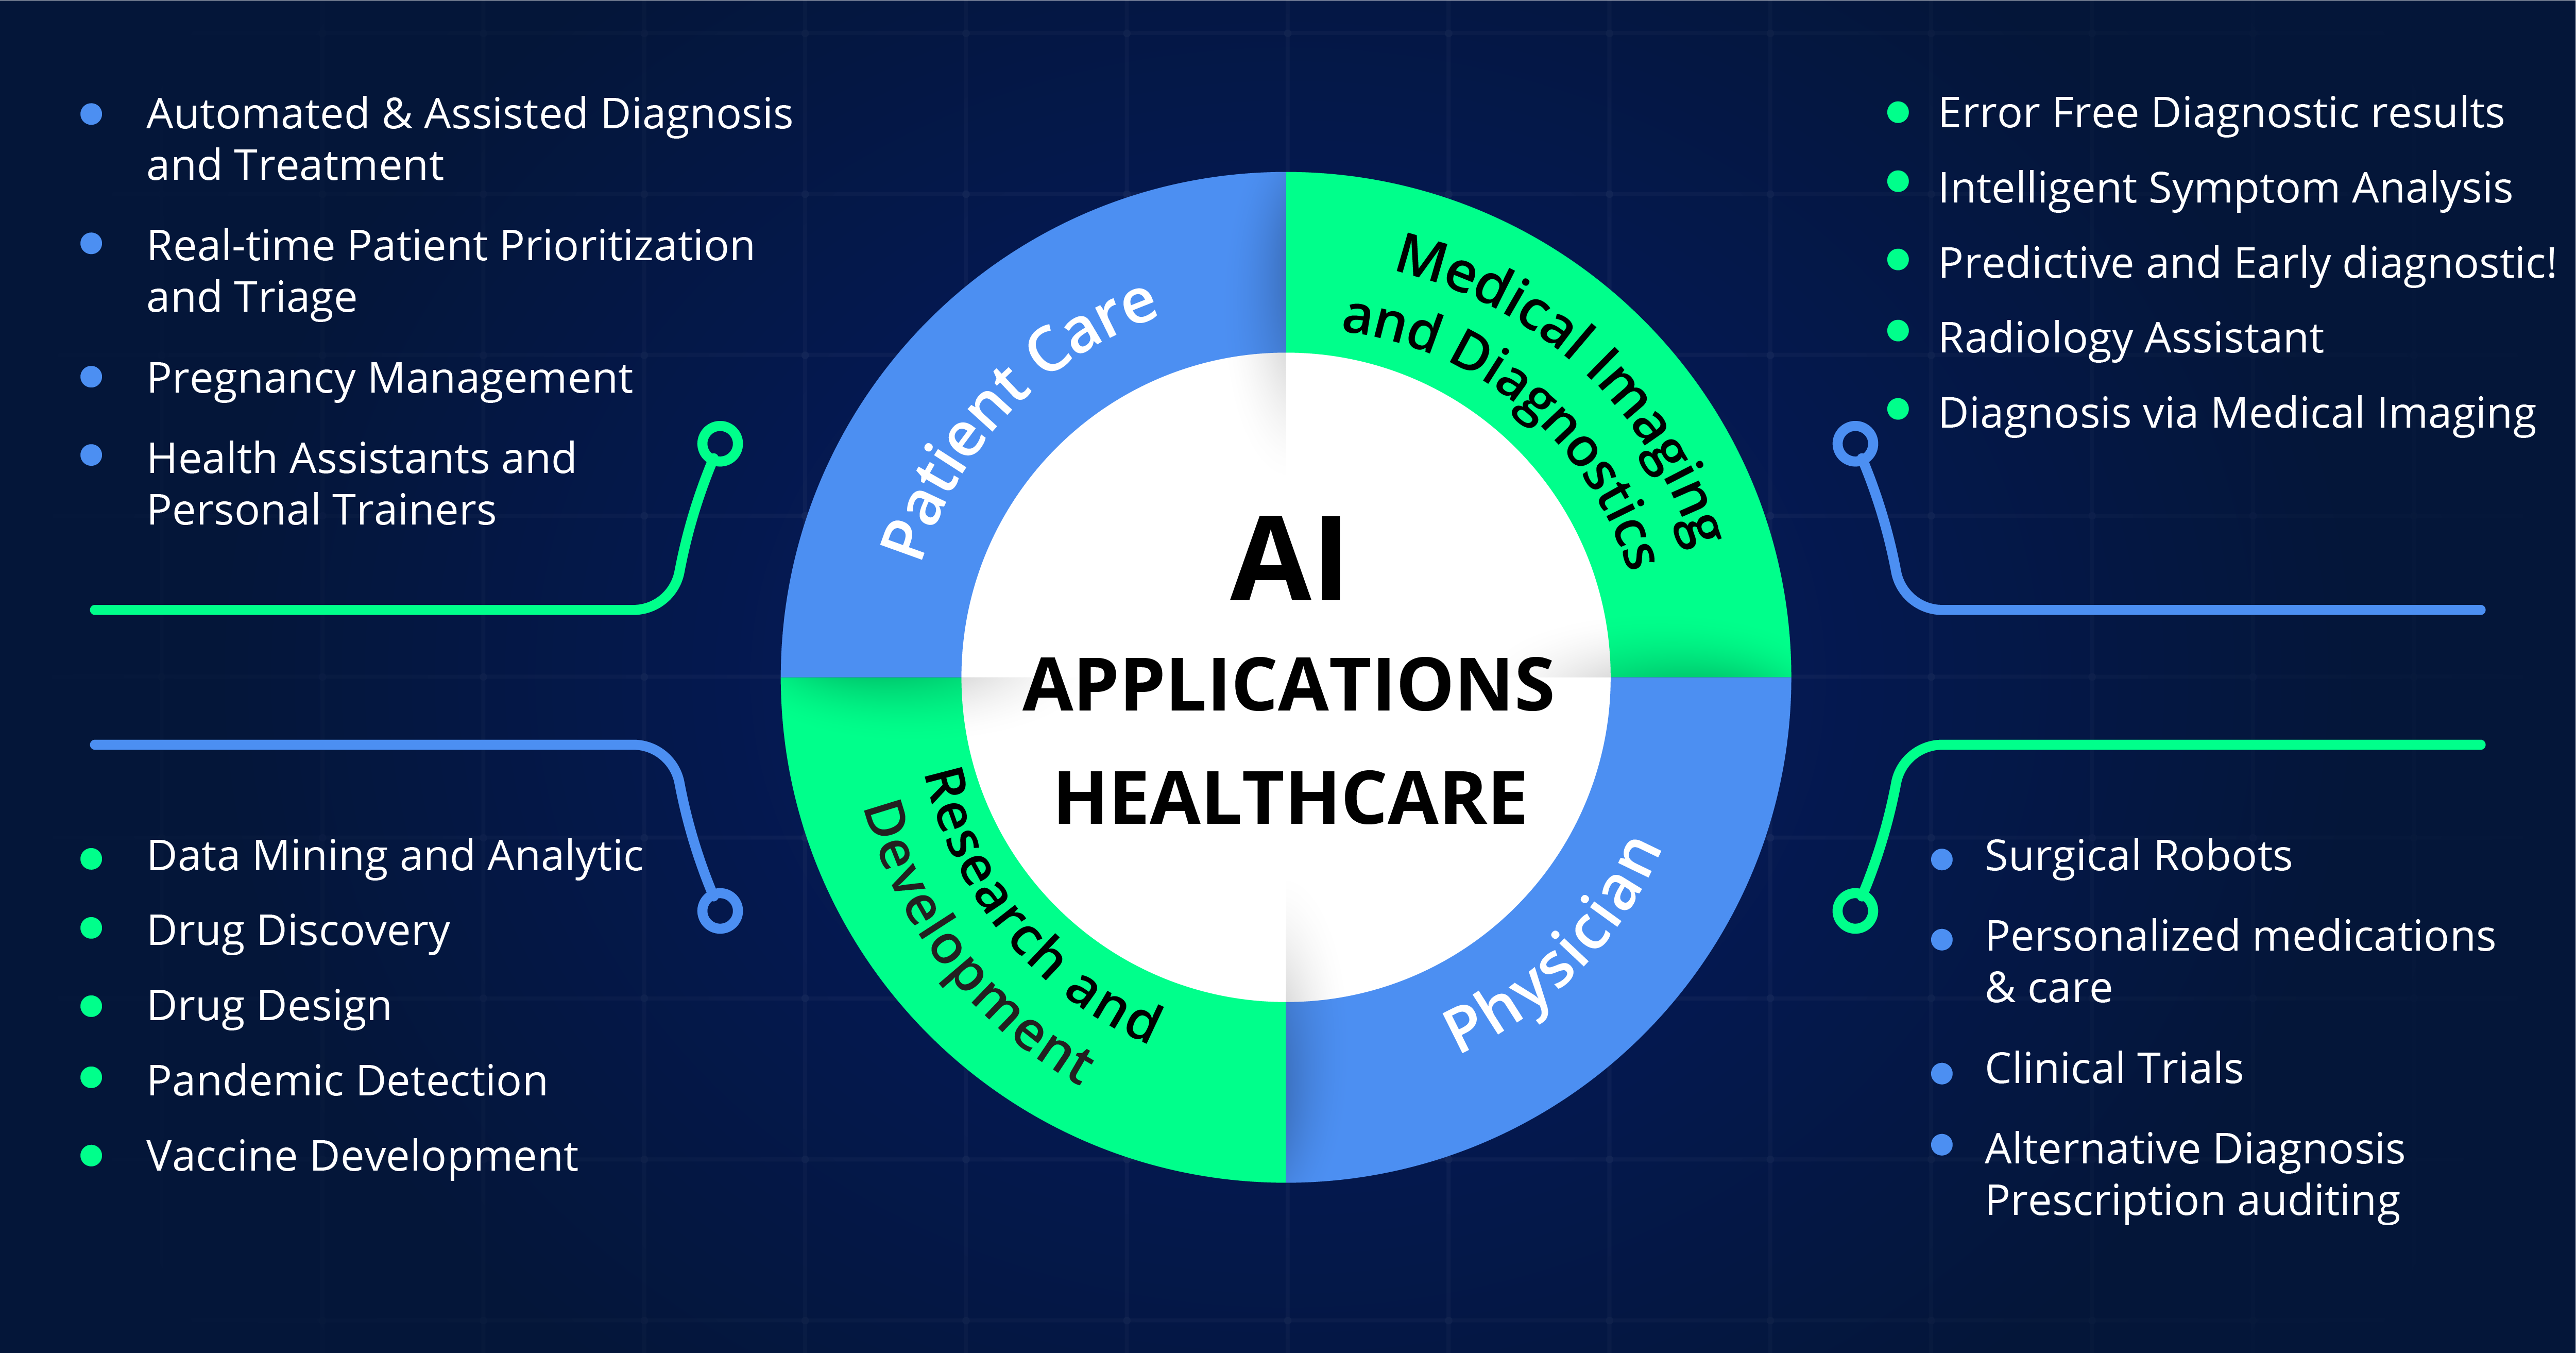 Four Pillars of AI Applications in Healthcare